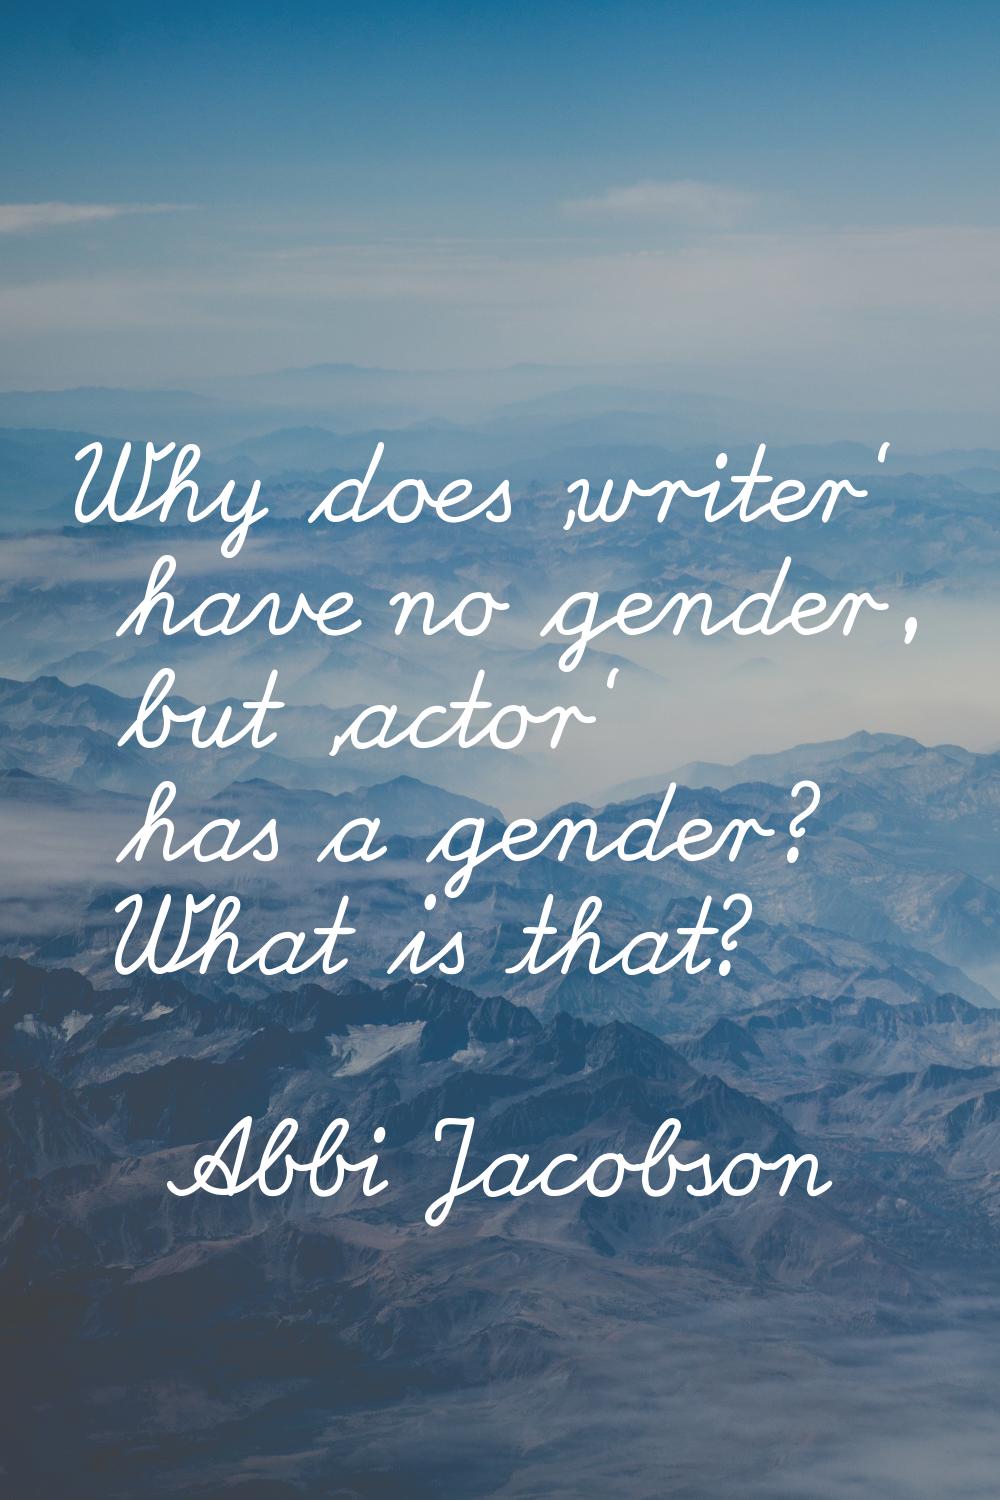 Why does 'writer' have no gender, but 'actor' has a gender? What is that?